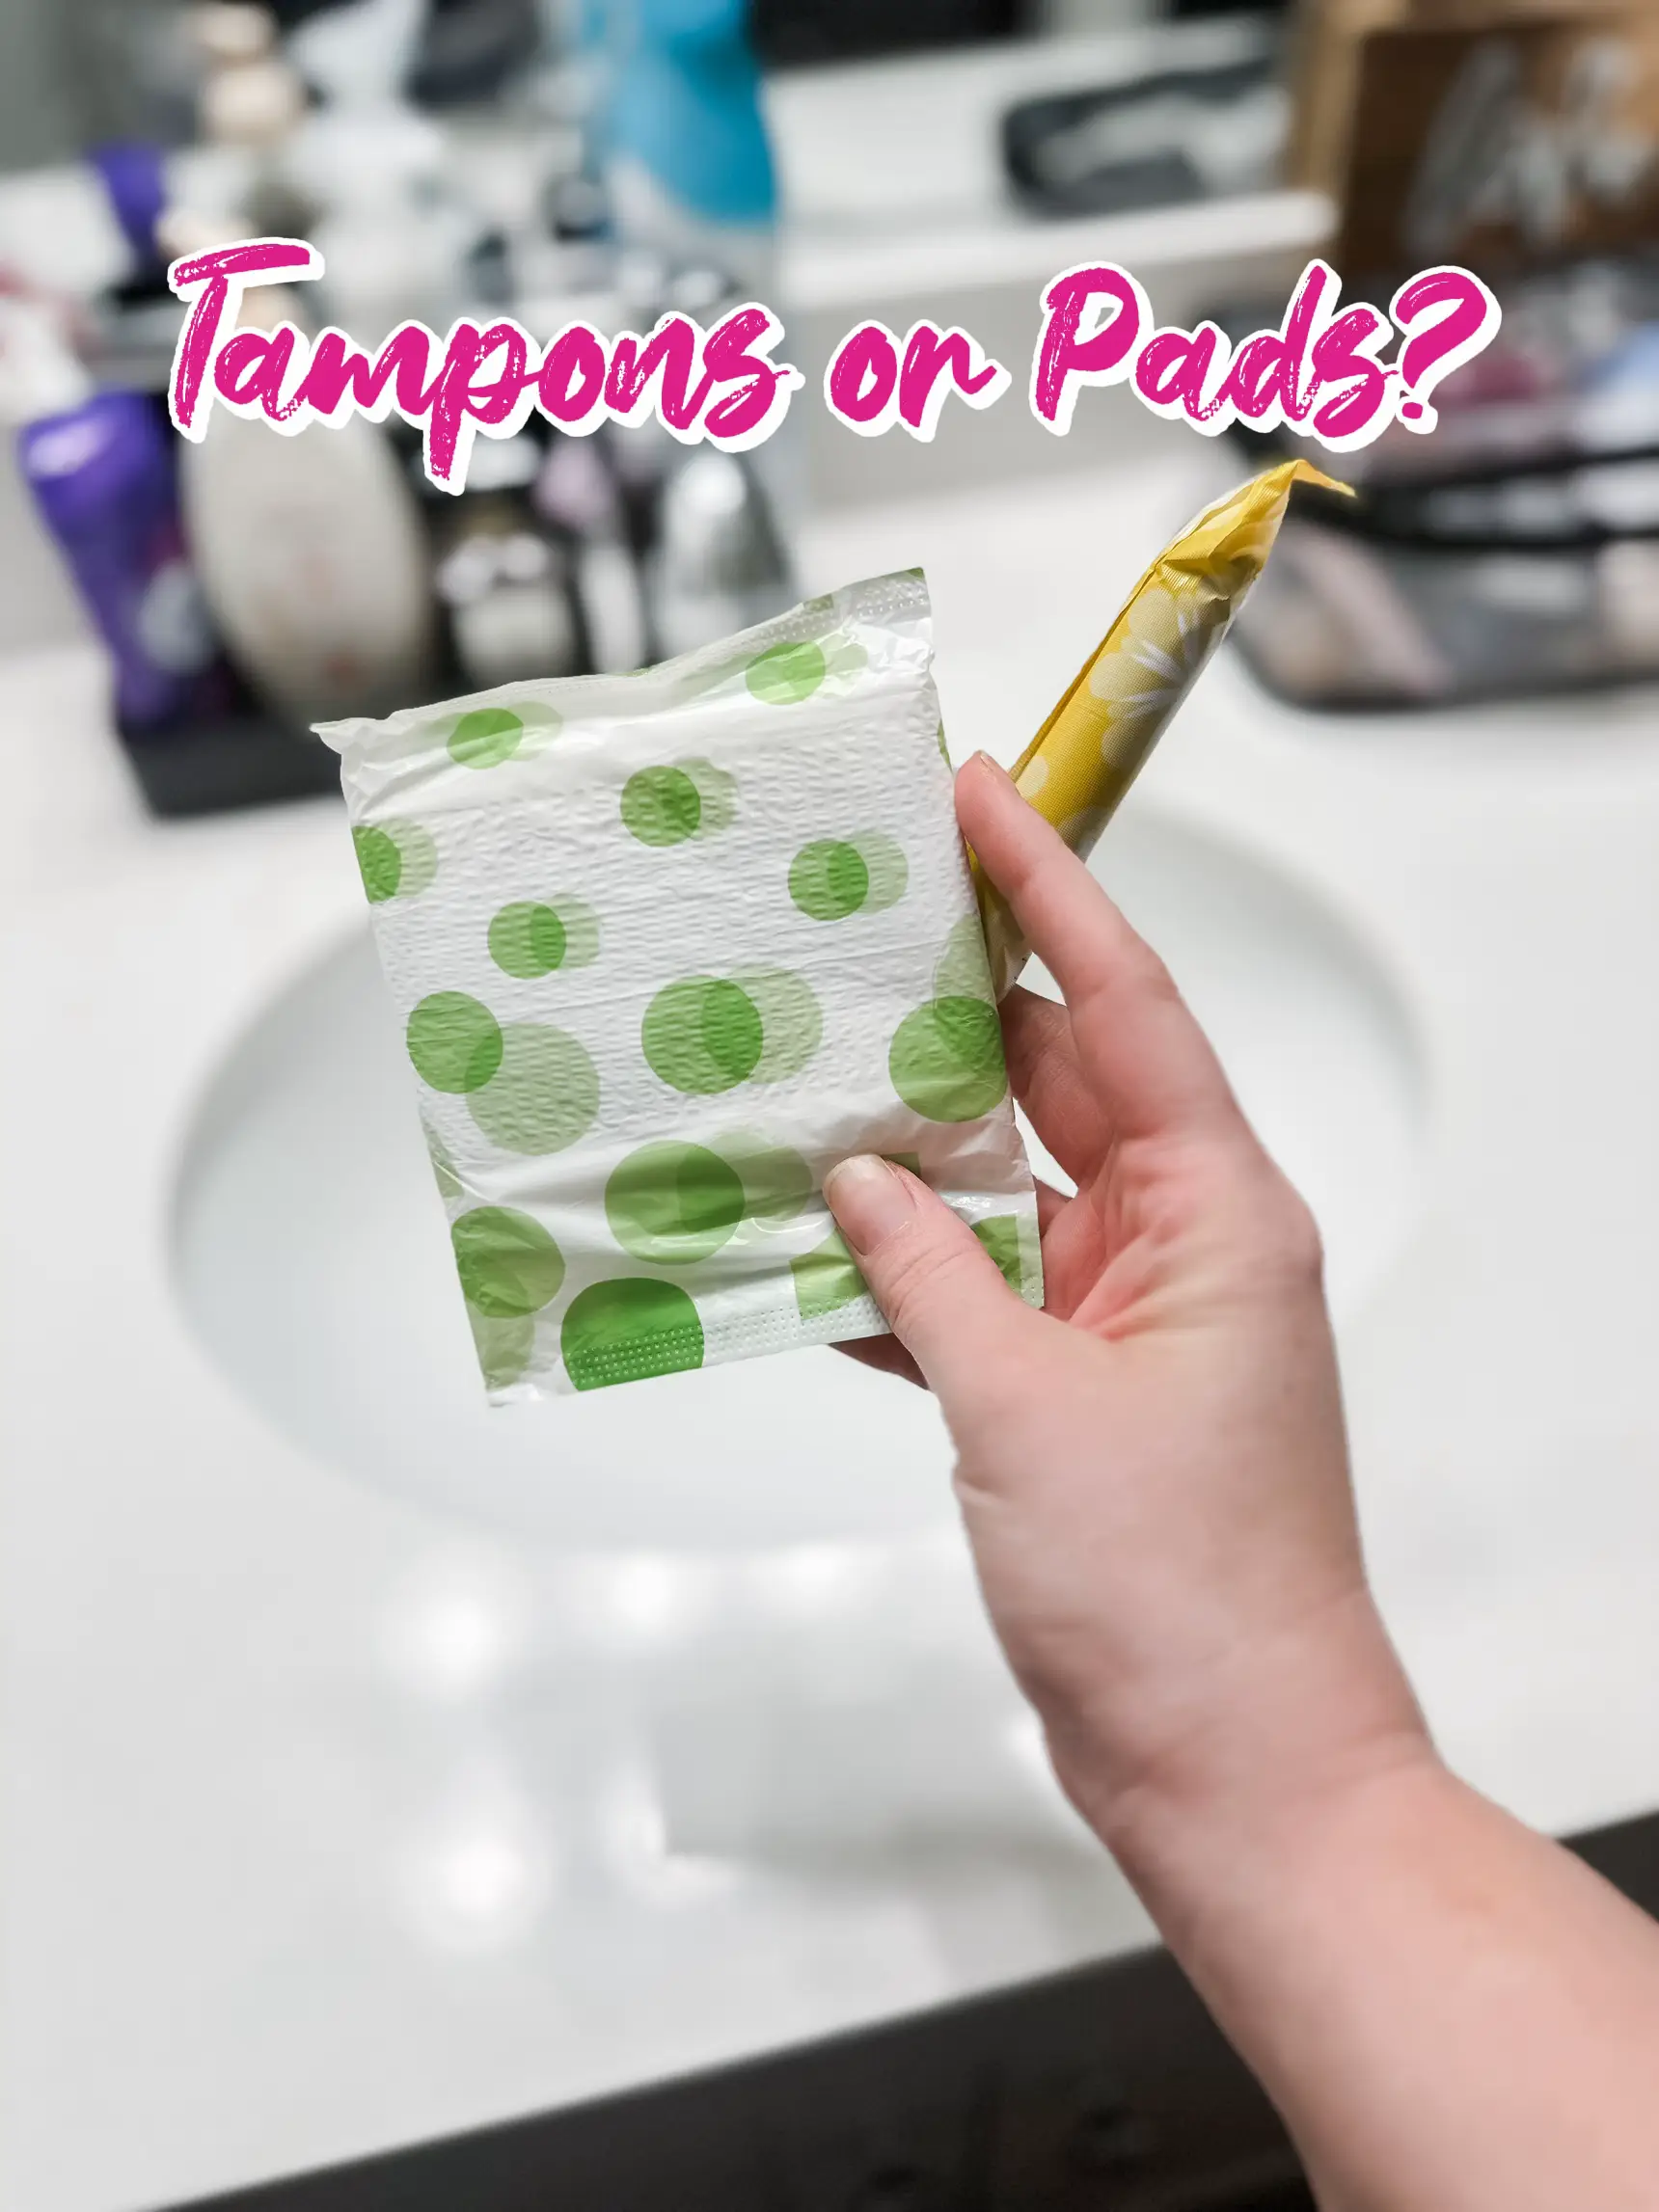 Playtex Sport Panty Liners & Unscented Tampons Combo Pack, 20